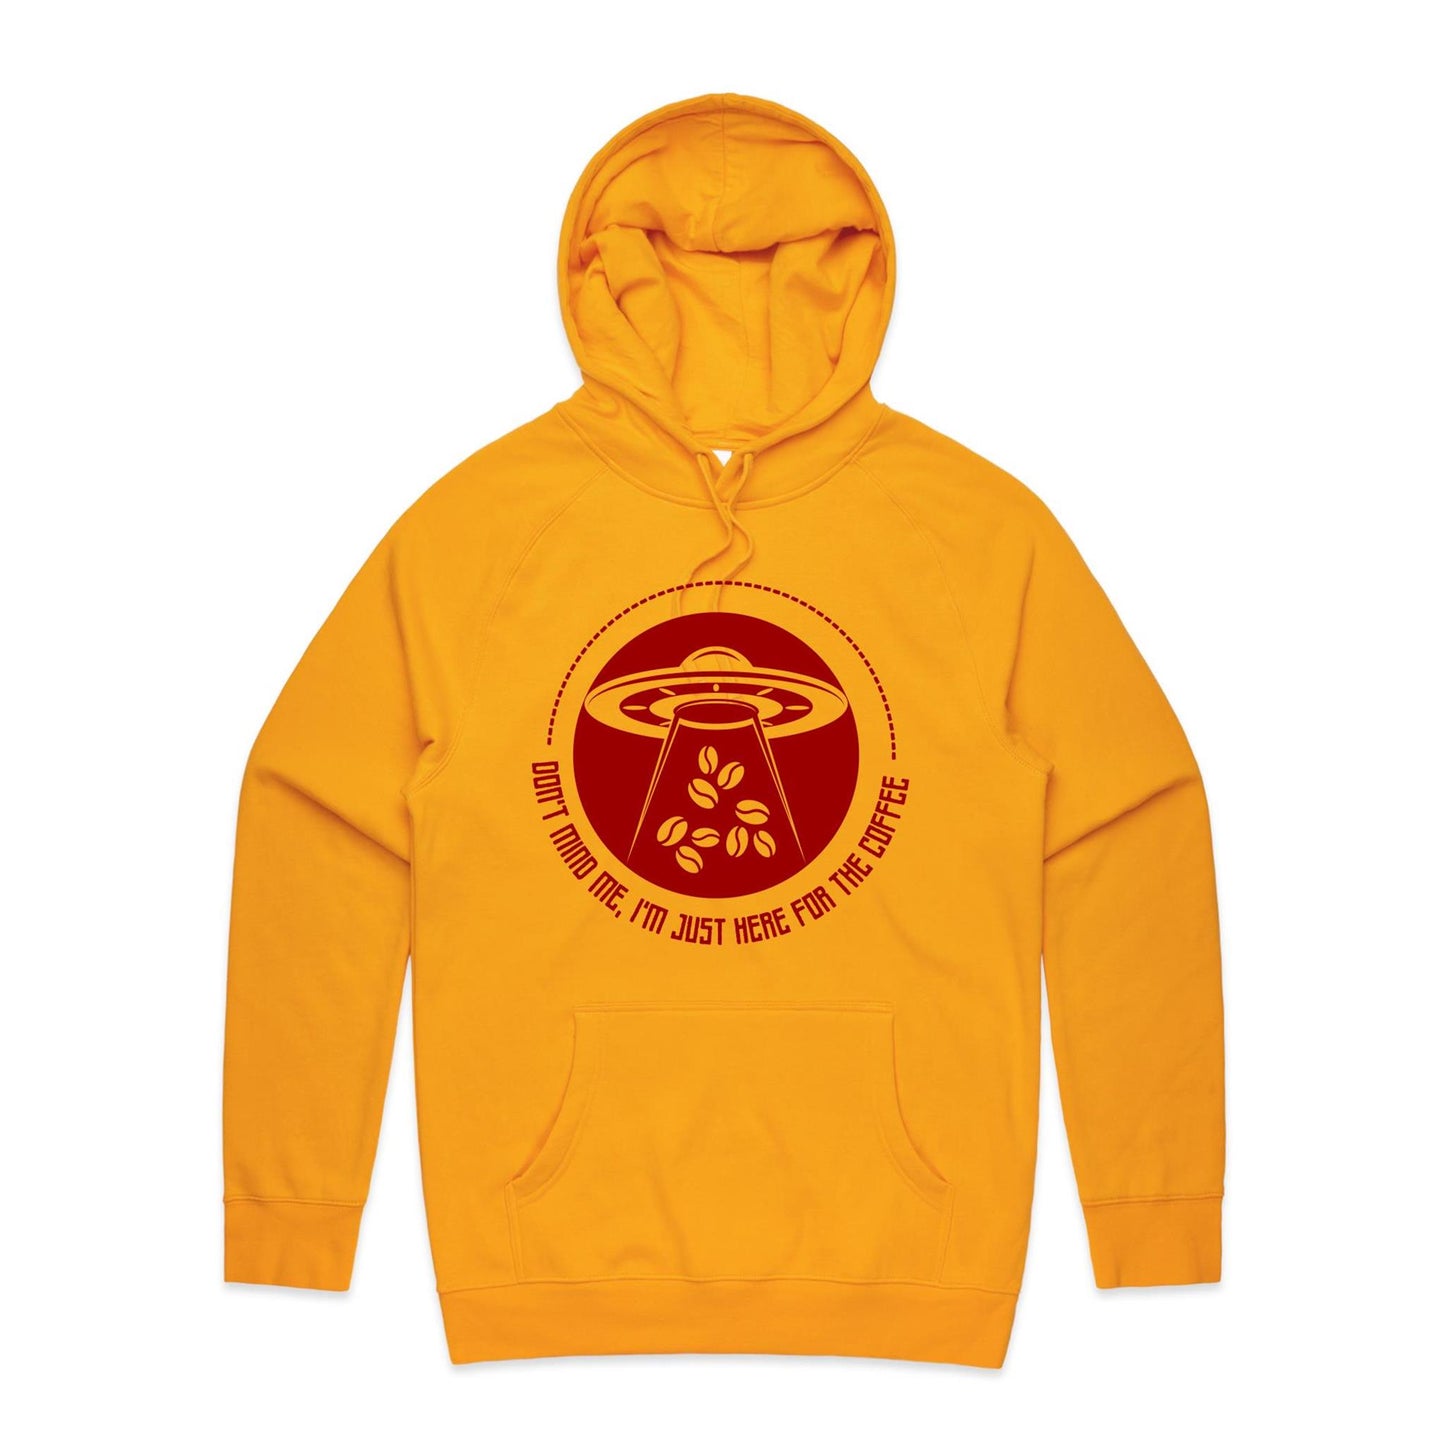 Don't Mind Me, I'm Just Here For The Coffee, Alien UFO - Supply Hood Gold Mens Supply Hoodie Coffee Sci Fi